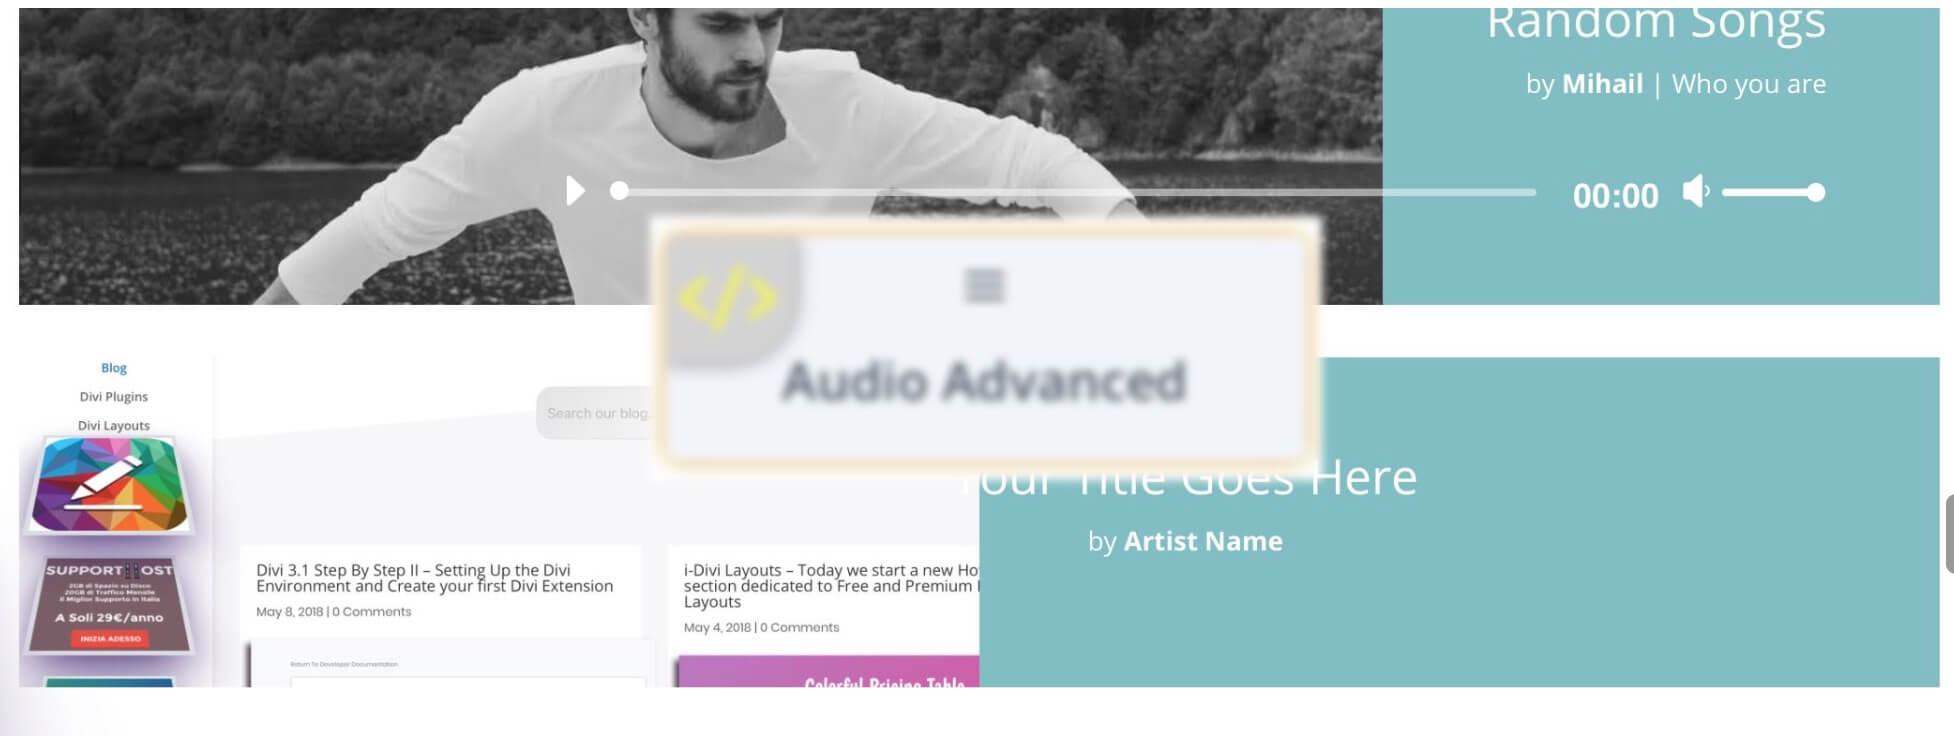 Divi 3.1 Step by Step V – Finishing our Divi Audio Advanced plugin